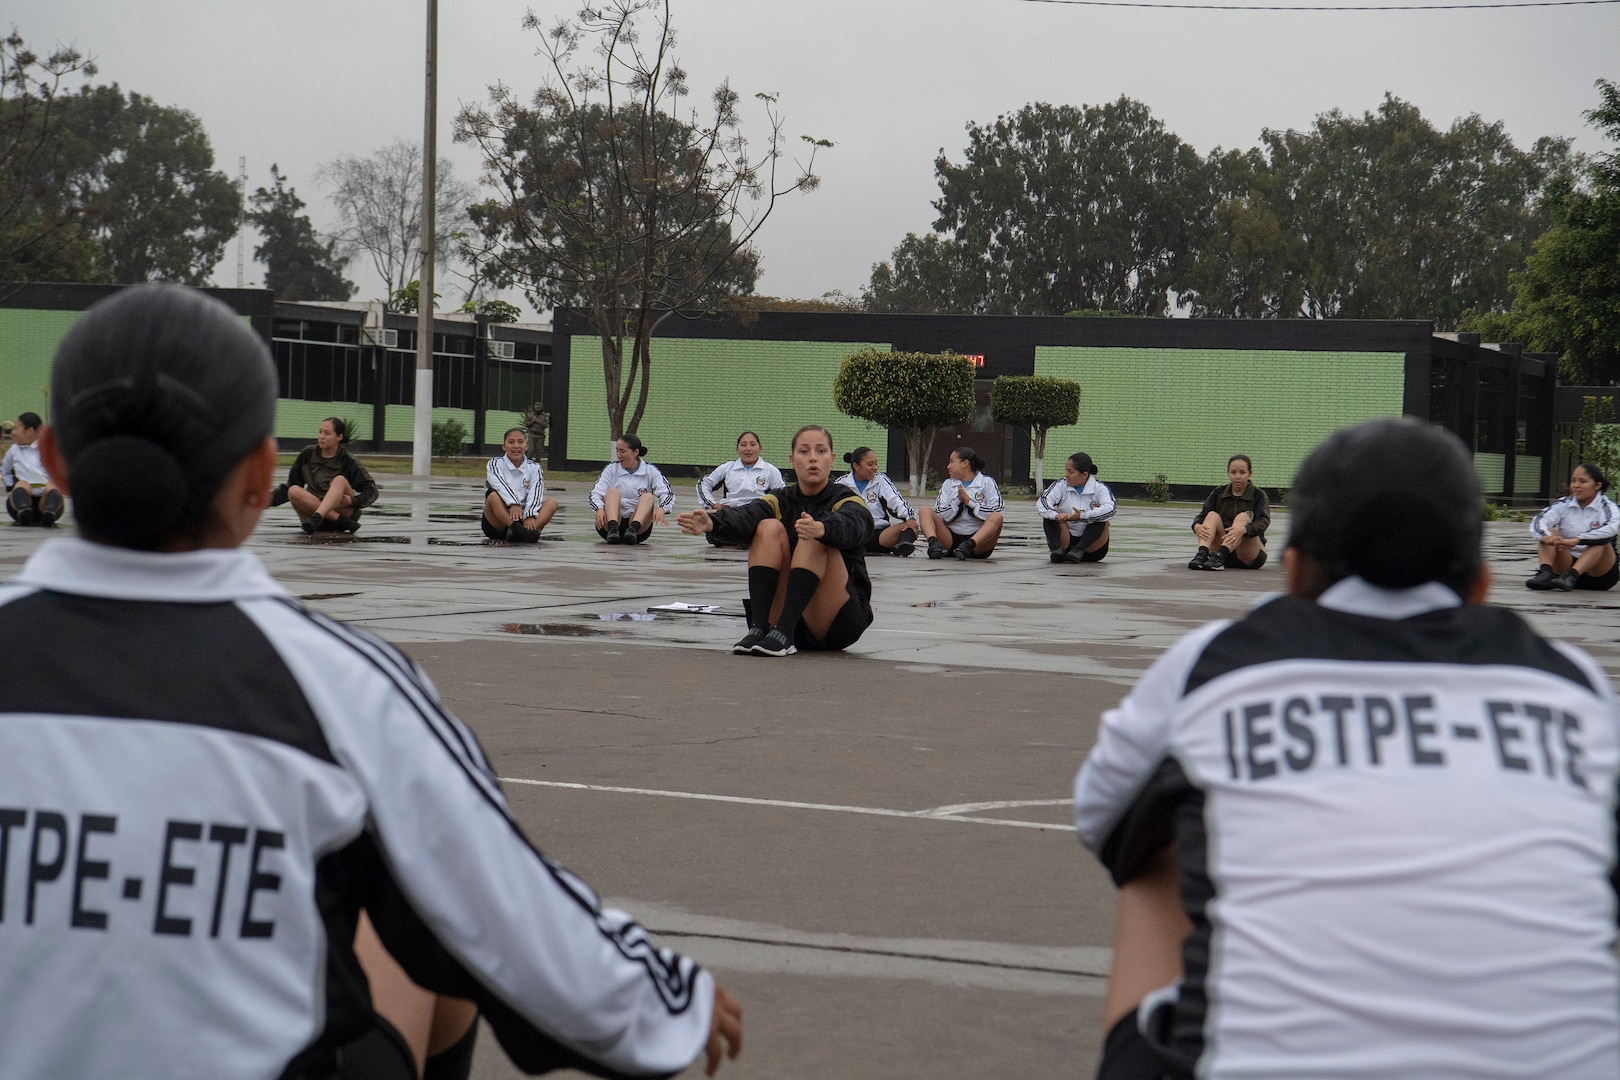 Sgt. Lyndsay Monaco, Not In My Squad (NIMS) workshop facilitator and Brigade S-1 NCO for the National Ground Intelligence Center, conducts physical readiness training with female soldiers of the Peruvian army Sept. 10, 2018, in Lima, Peru. U.S. service members from the WVNG and U.S. Army South worked with the Peruvian Army to facilitate training for non-commissioned officer development, professionalism, ethical behavior, physical fitness, and gender integration for more than 500 PERAR soldiers during a week-long engagement.